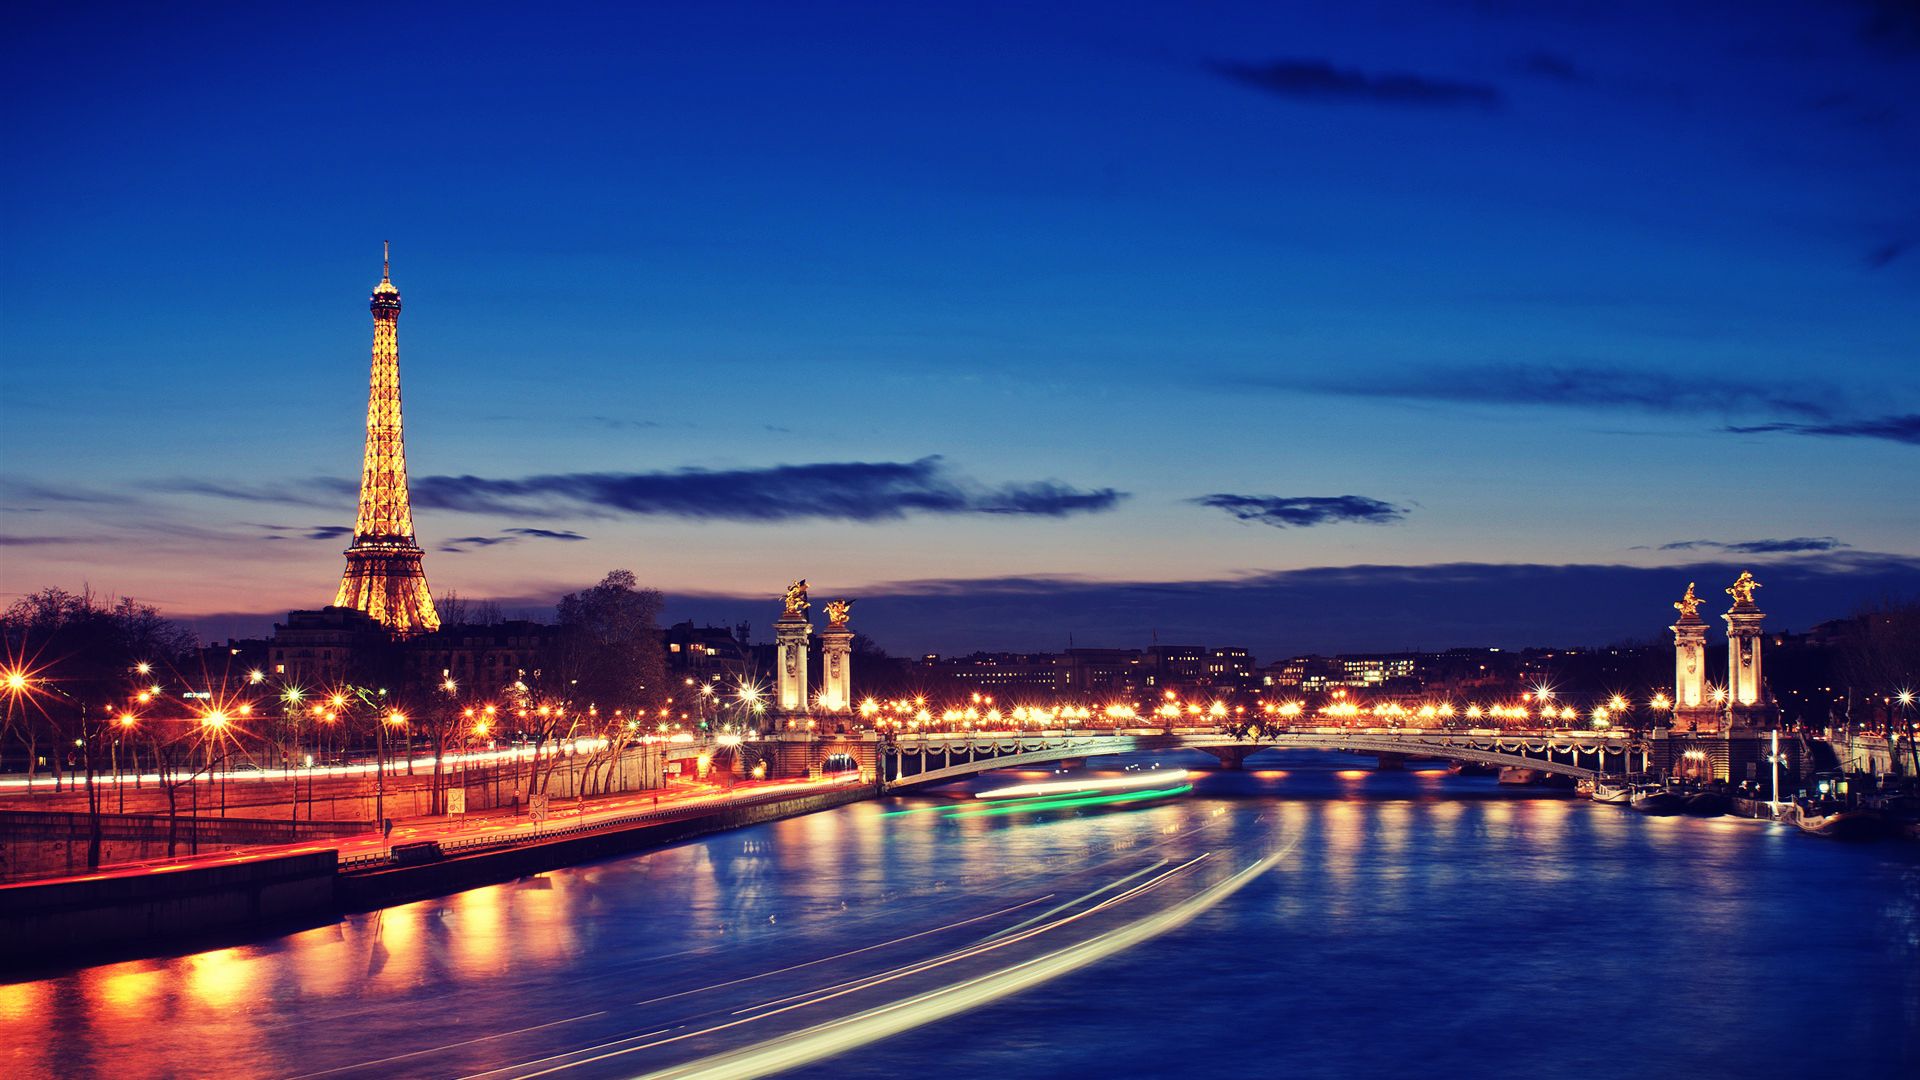 Download 35 HD Paris Backgrounds The City Of Lights And Romance